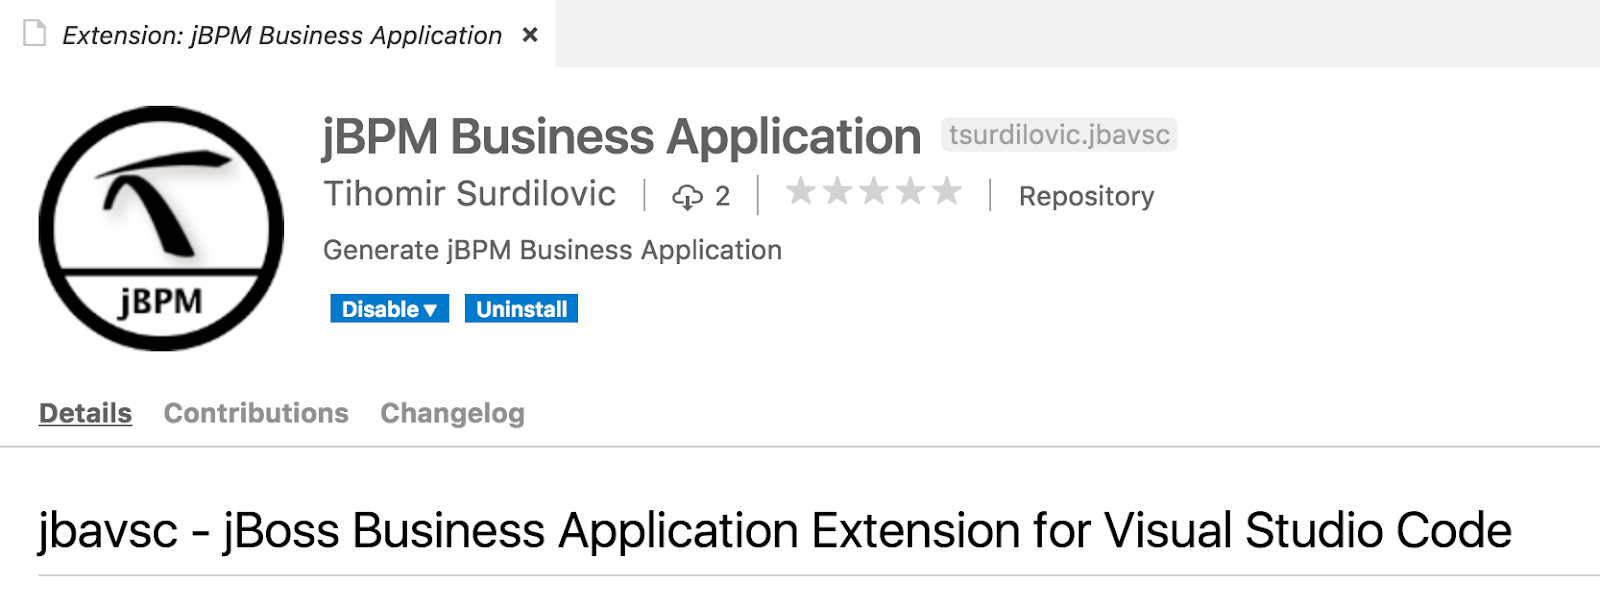 Application extension